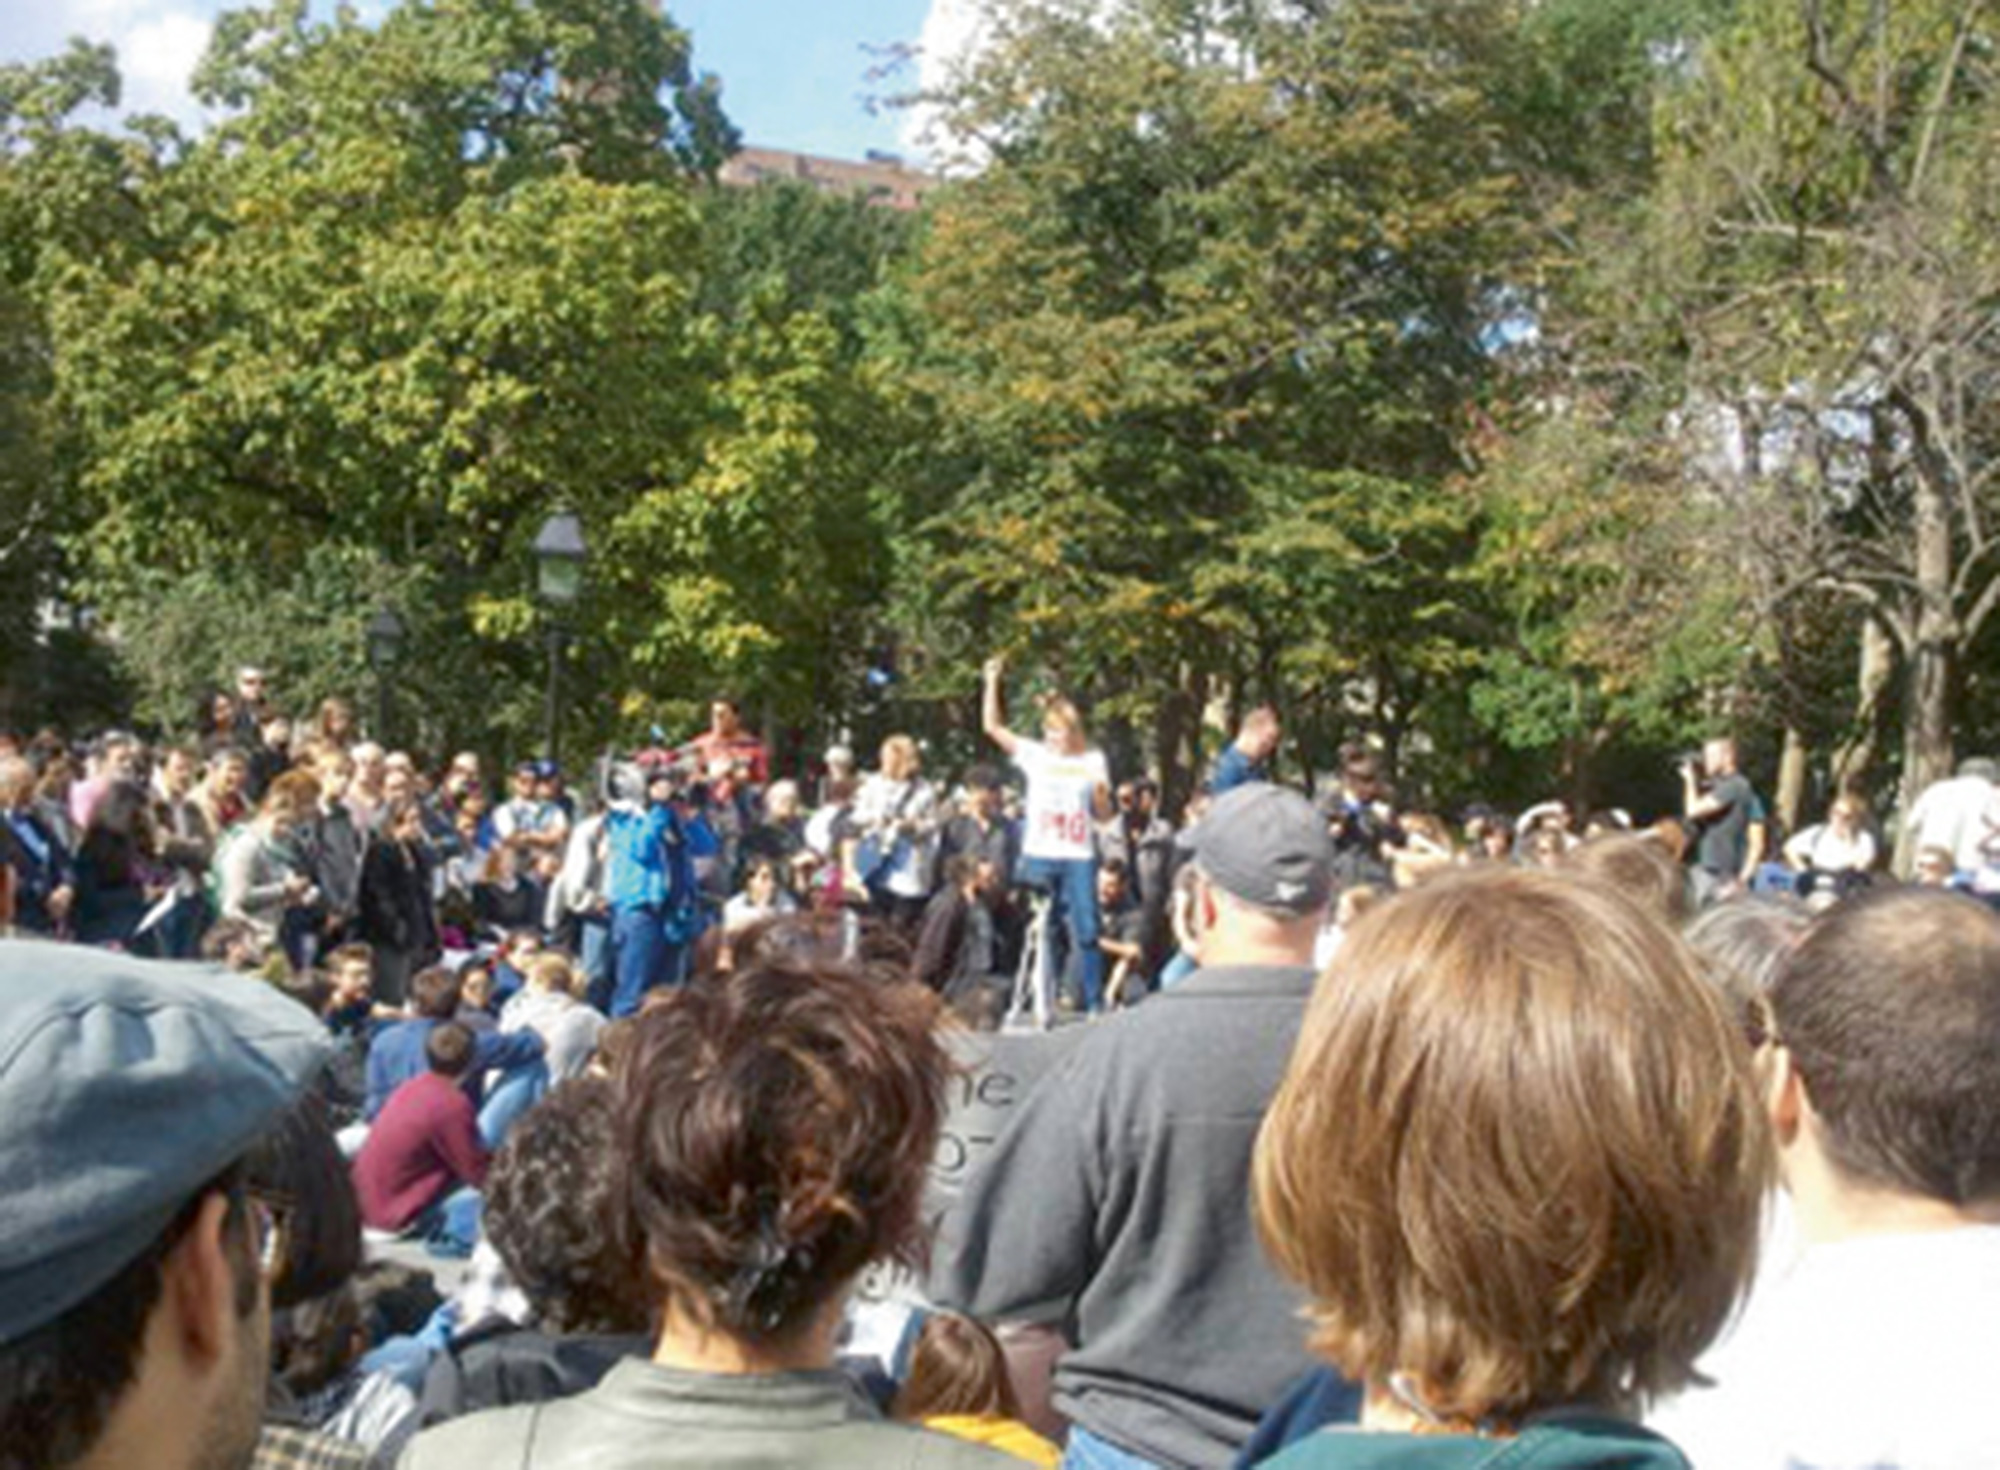 A twenty eleven photograph of a crowd at Occupy Wall Street.